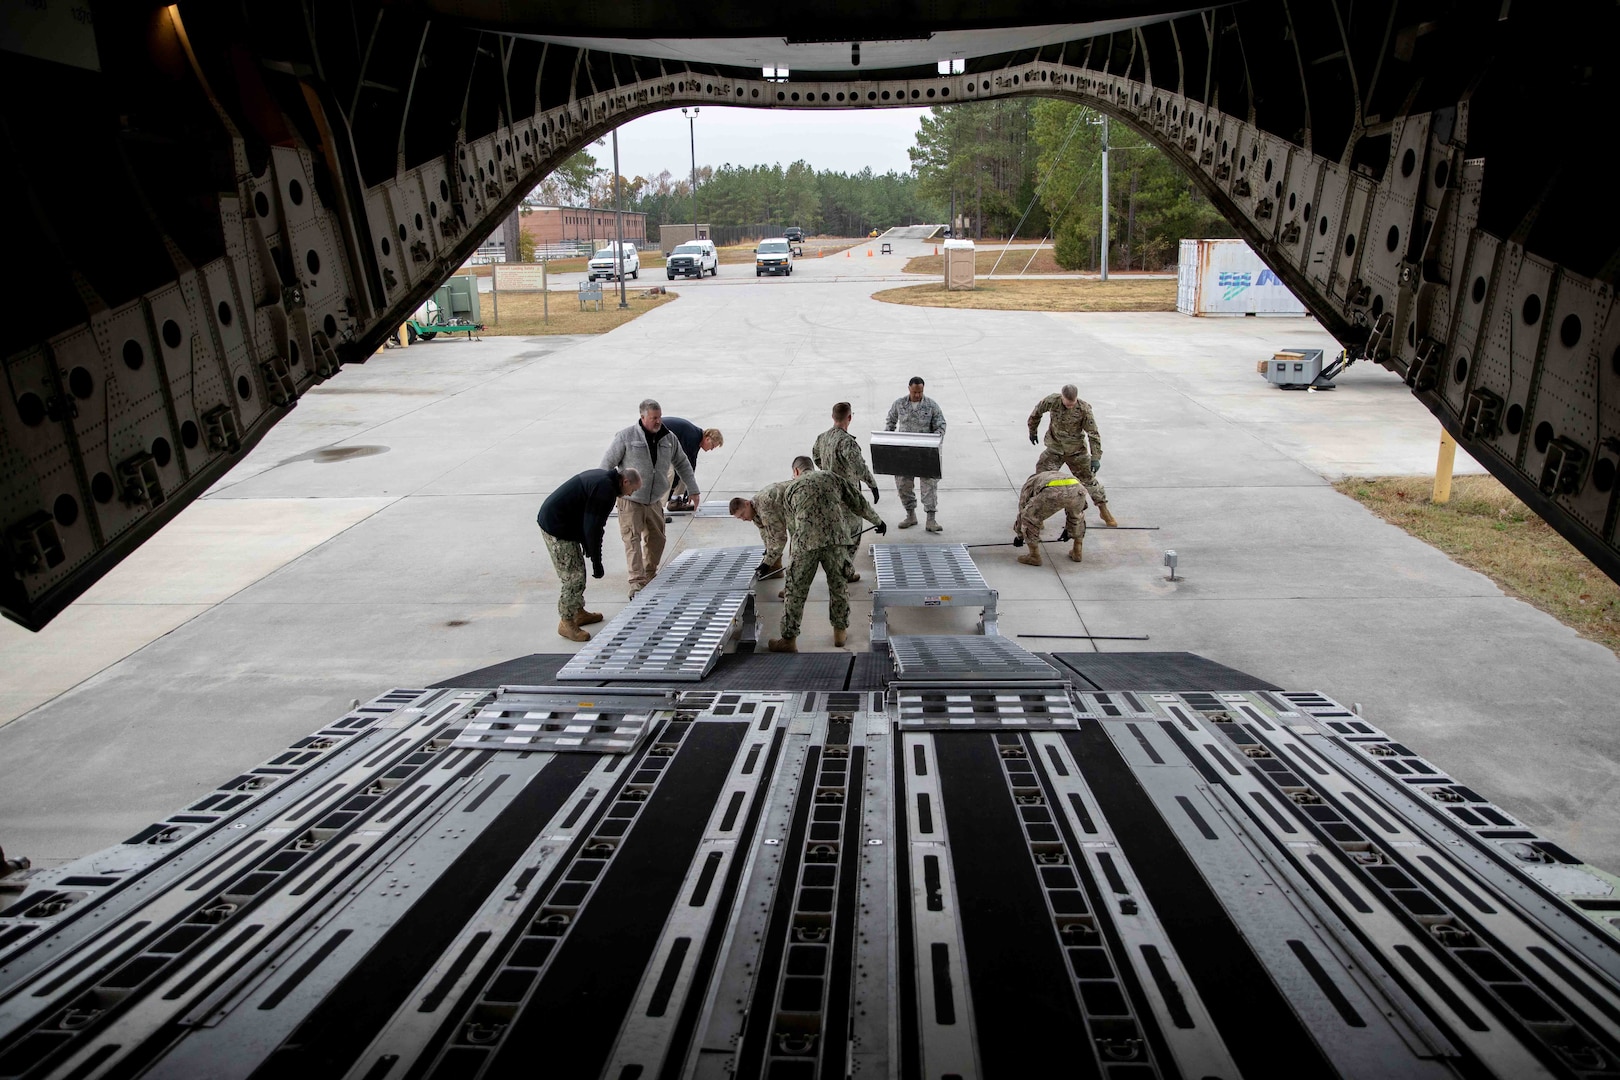 Joint Task Force Civil Support (JTF-CS) set up a box truck loading ramp on a mock C-17 aircraft as part of aircraft load training. JTF-CS holds this type of training at least once quarterly to build personnel proficiency and confidence in aircraft loading procedures. (DoD photo by Chief Mass Communication Specialist Barry Riley/RELEASED)